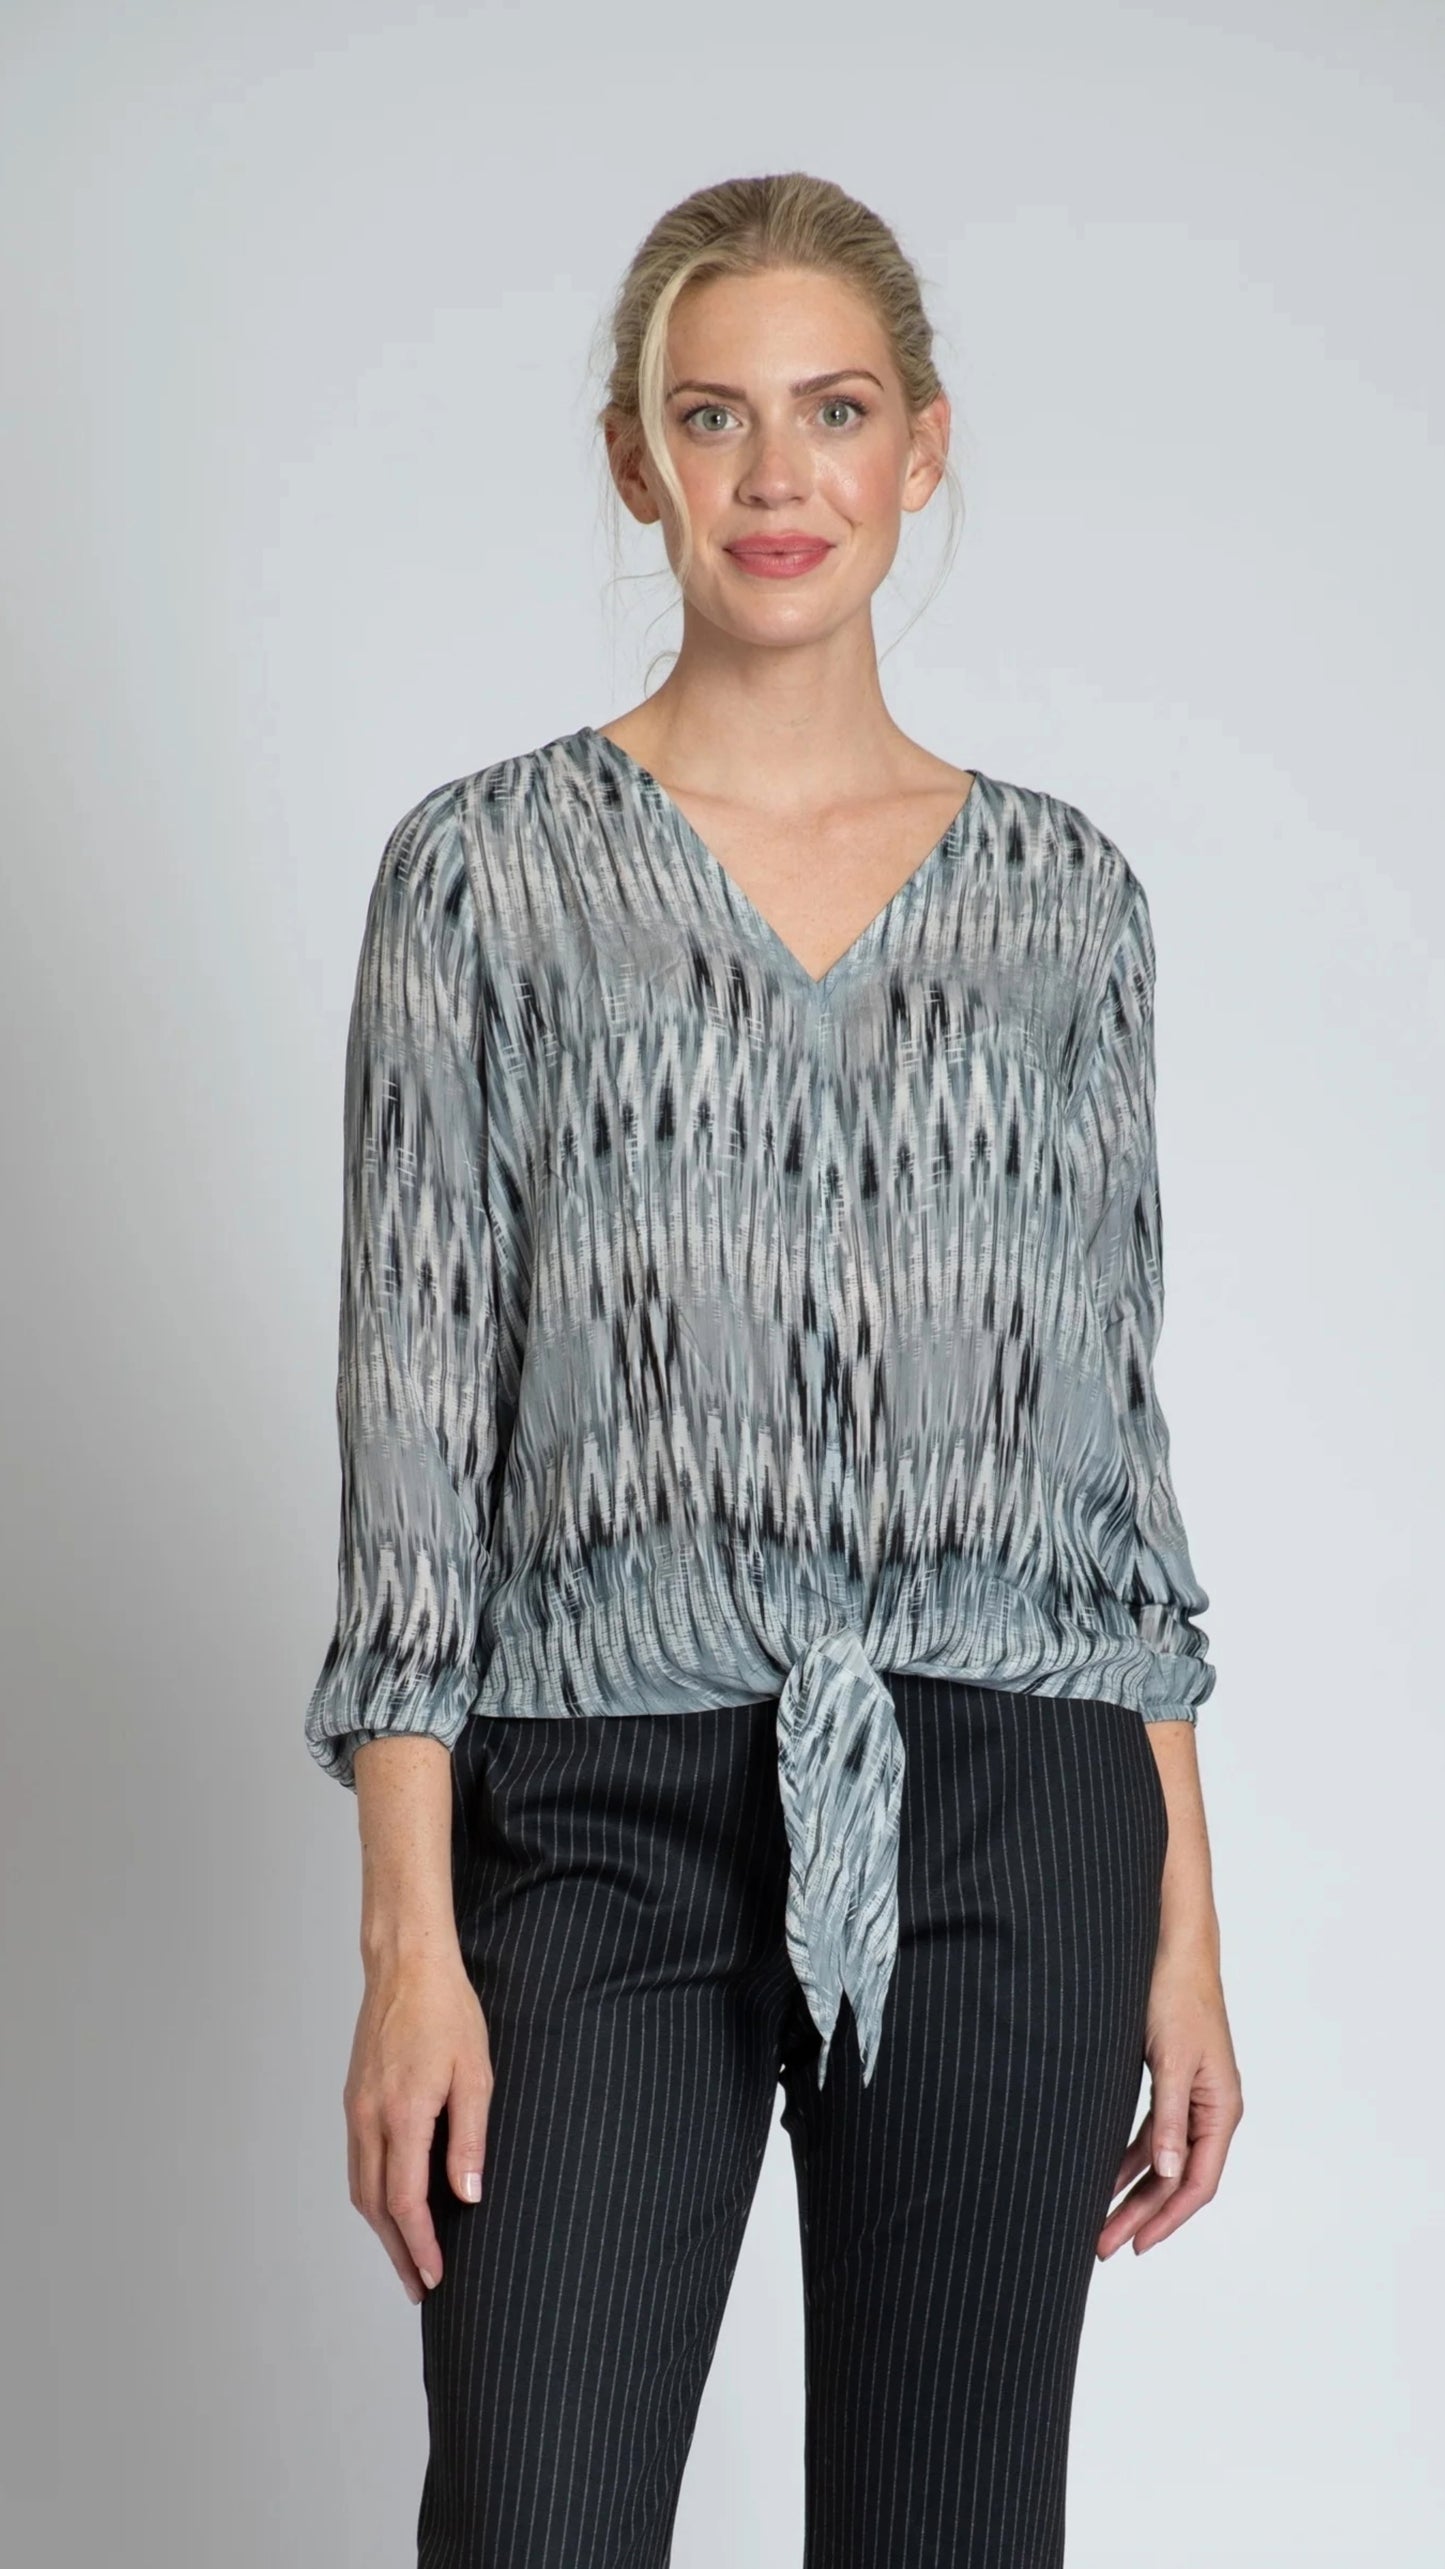 APNY V-Neck Tie Front Top - Multiple Colors